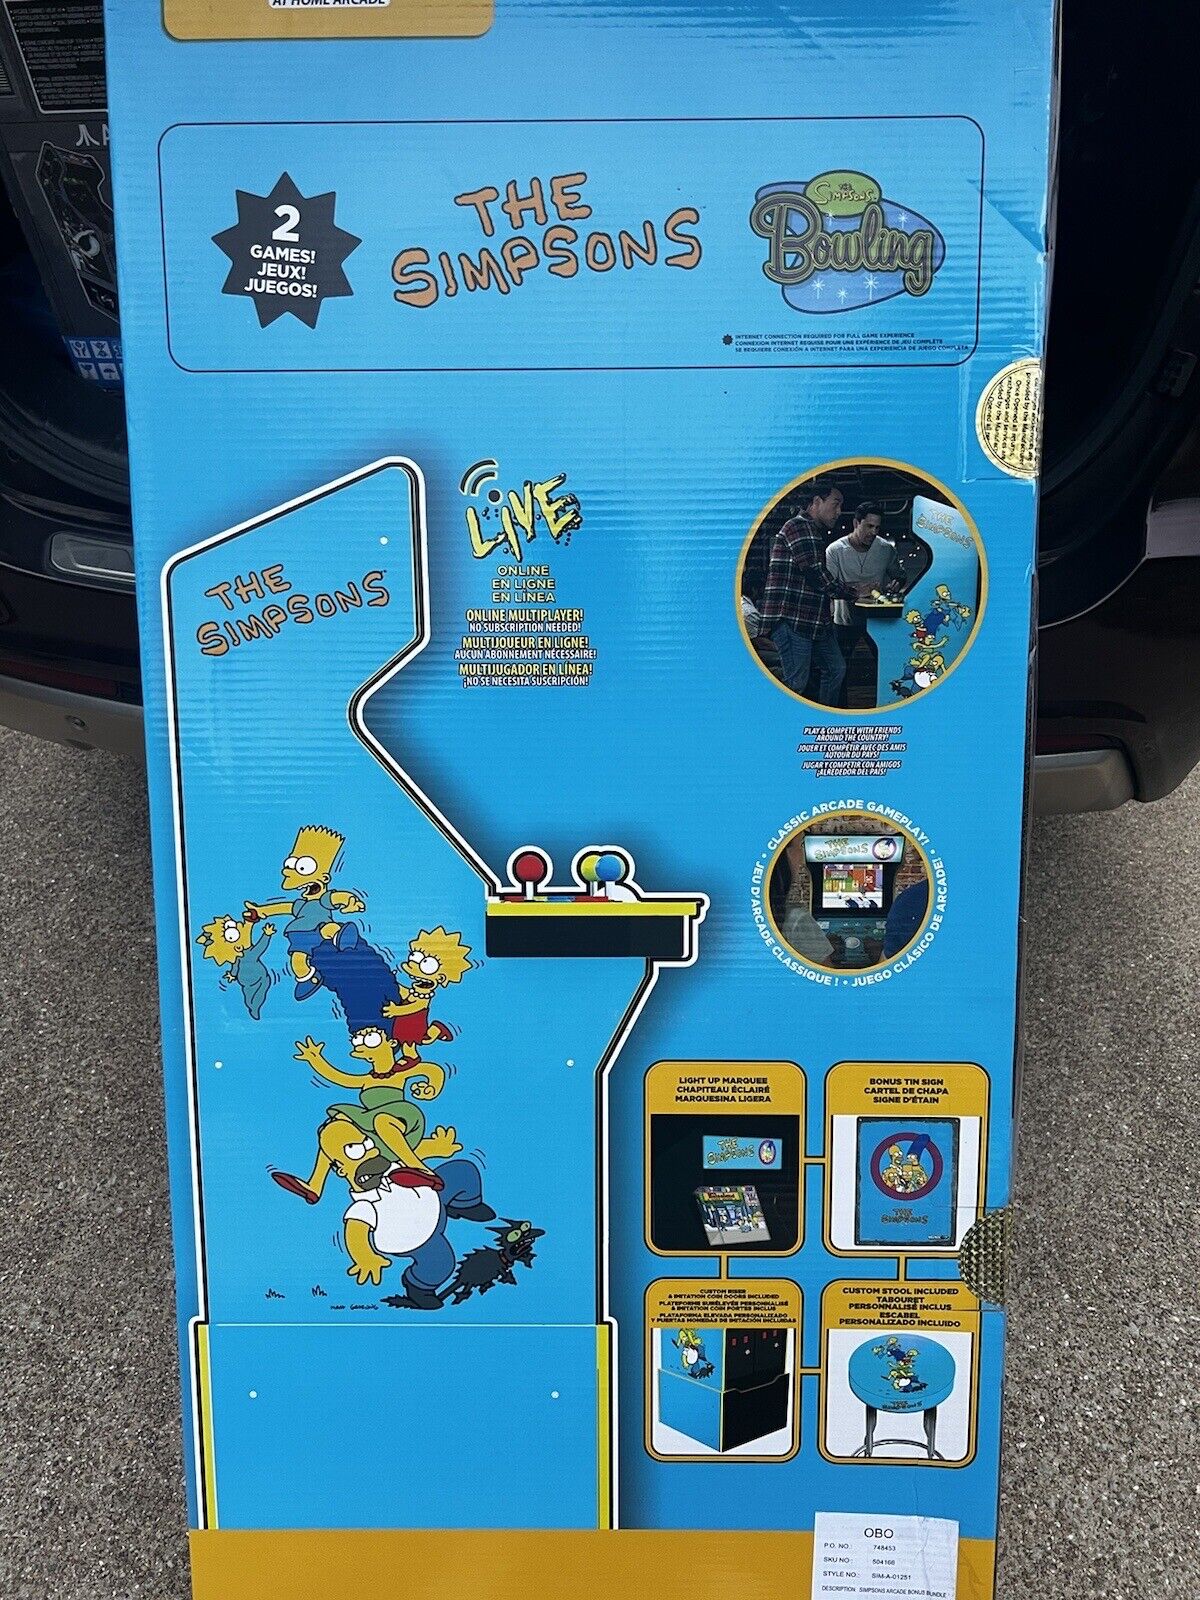 Arcade1up The Simpsons 30th Edition Arcade Machine with Stool - SIM-A-01251 NEW